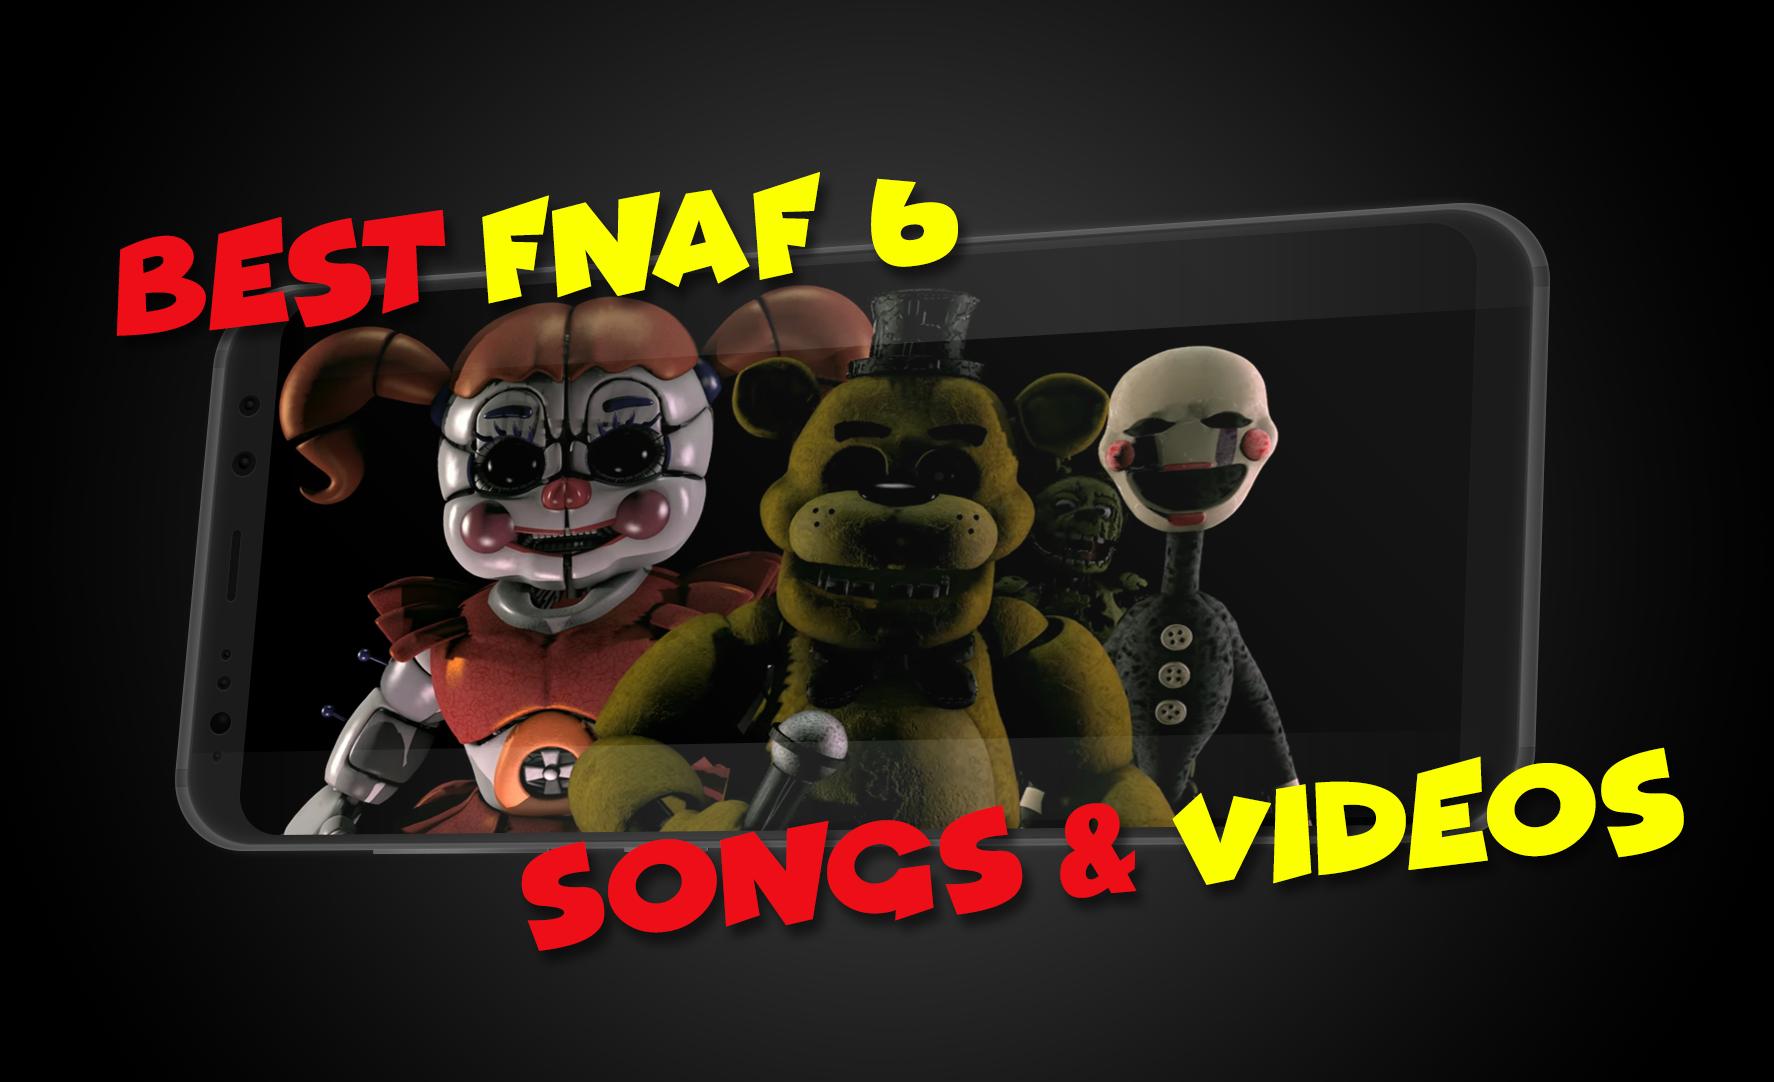 Fnaf 6 Song Labyrinth Roblox Id How To Get Free Robux On - roblox fnaf picture id